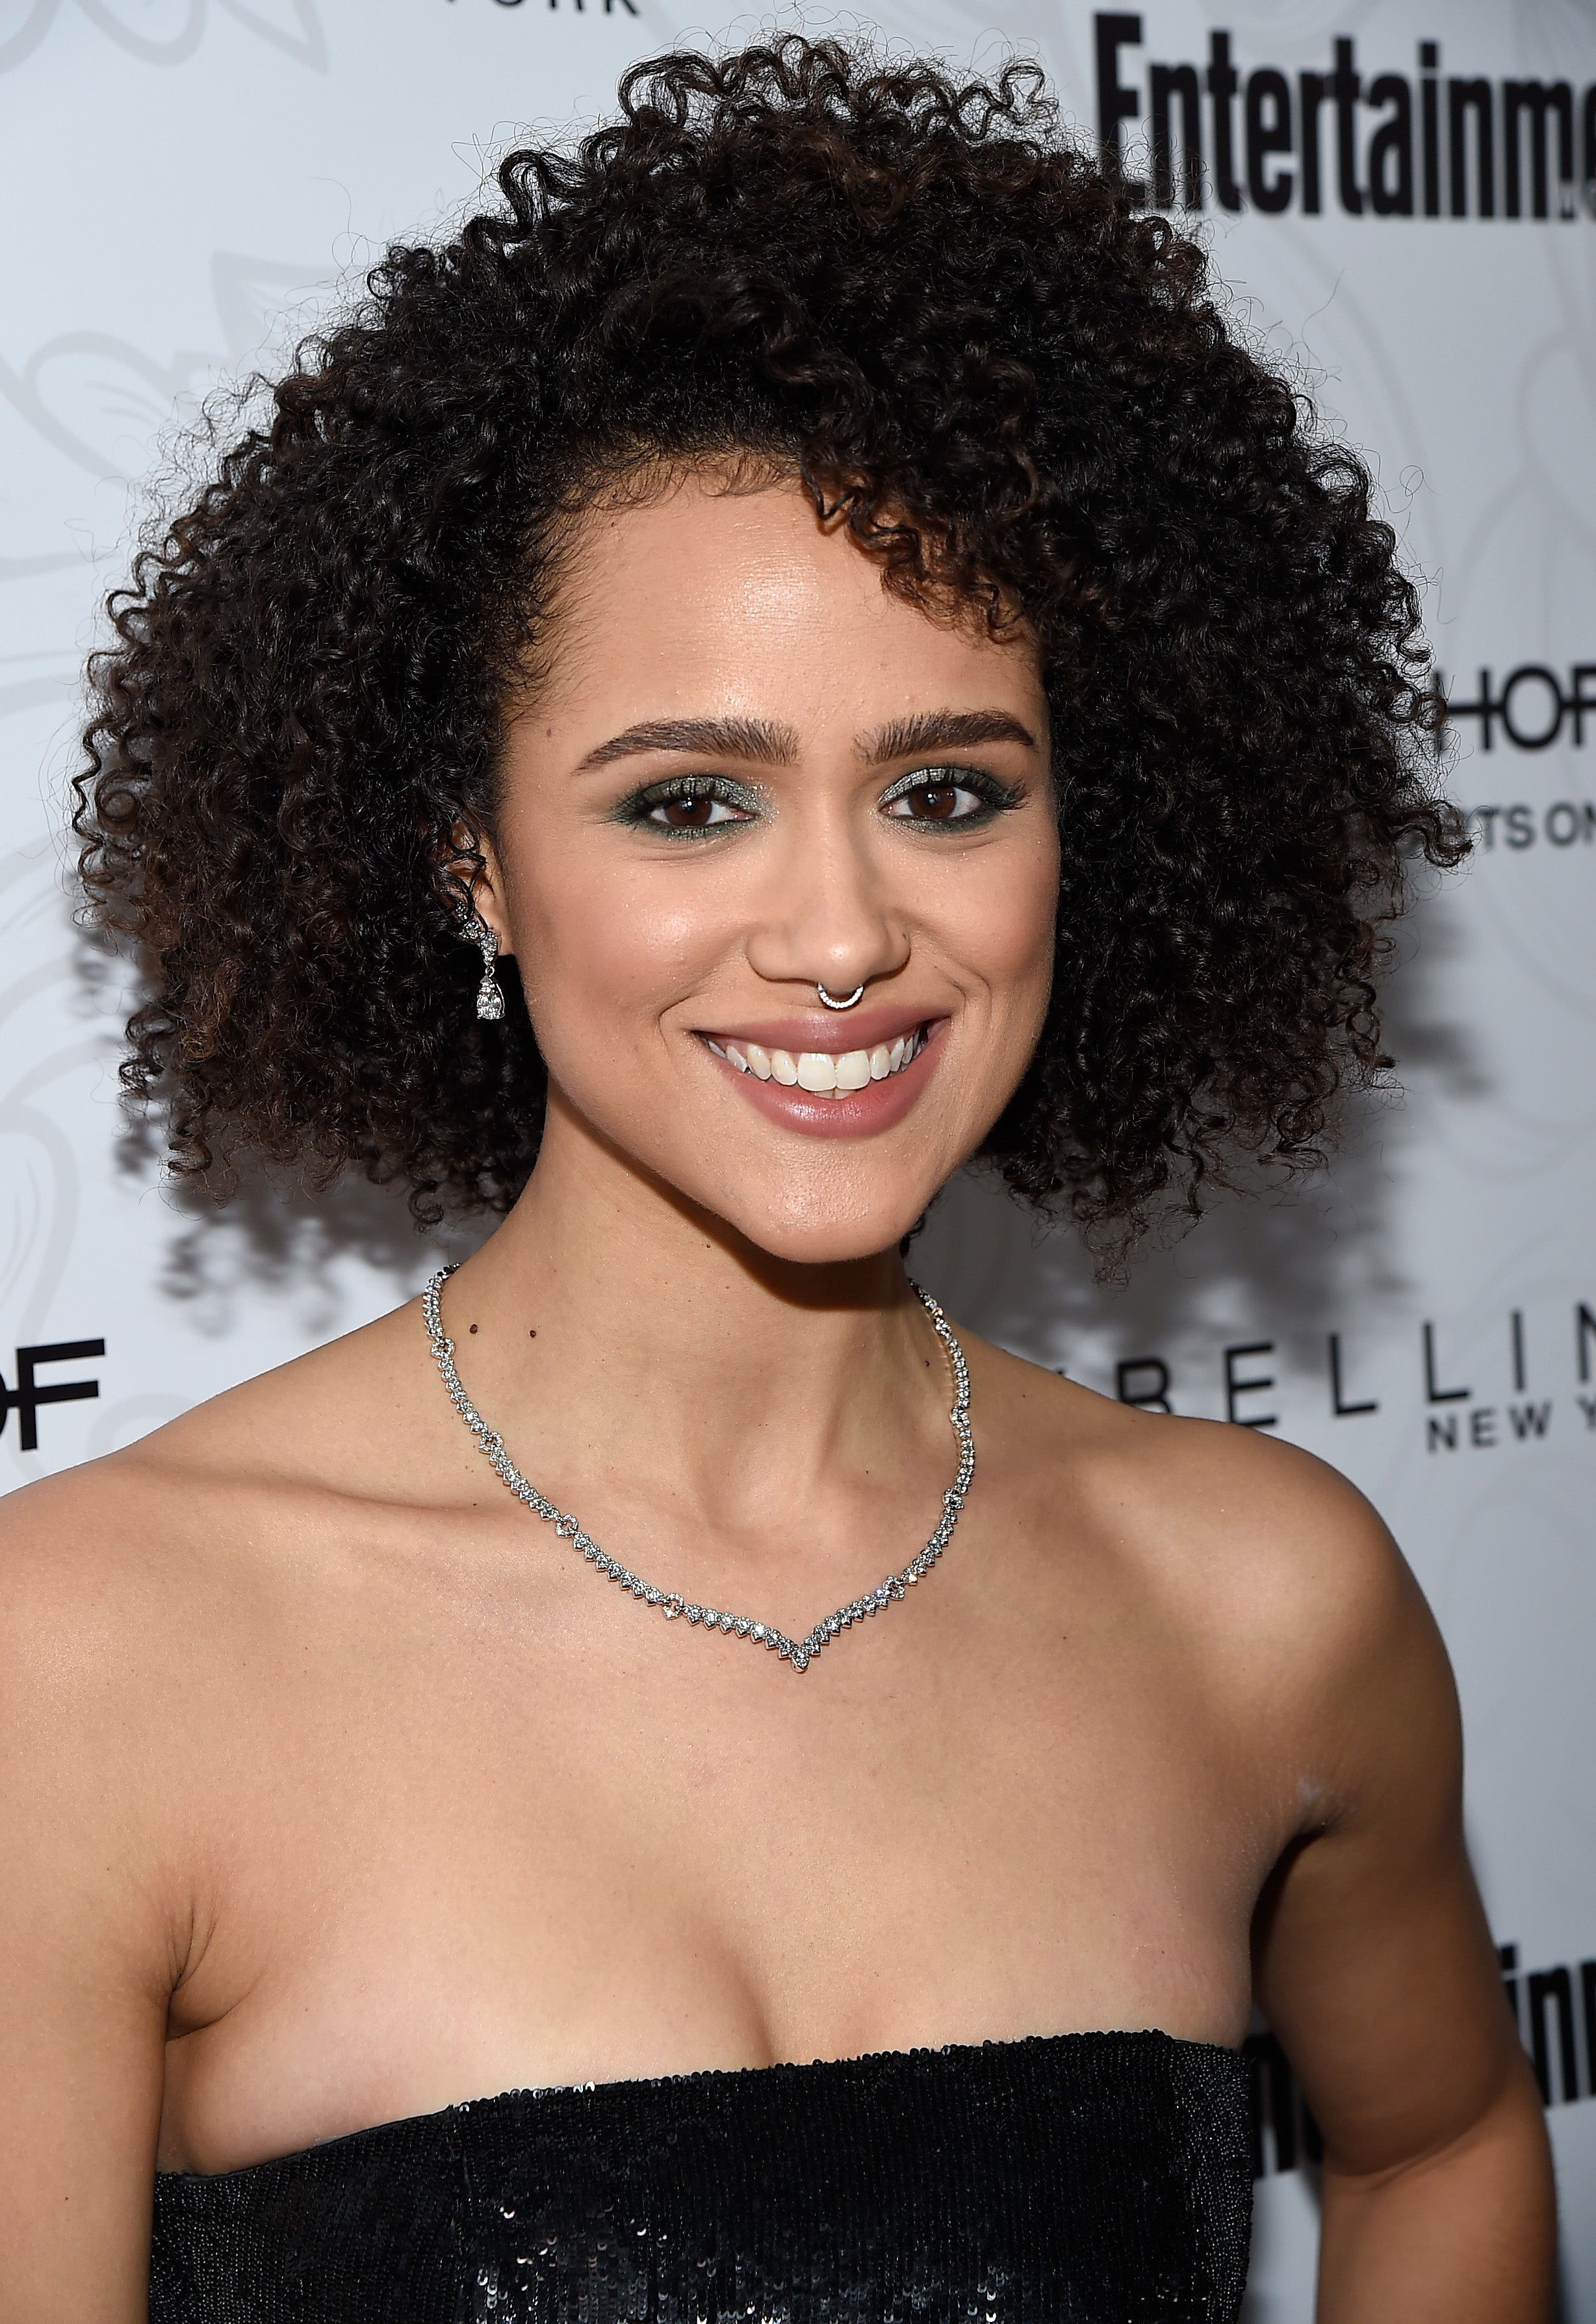 Famous celeb with black curly hair